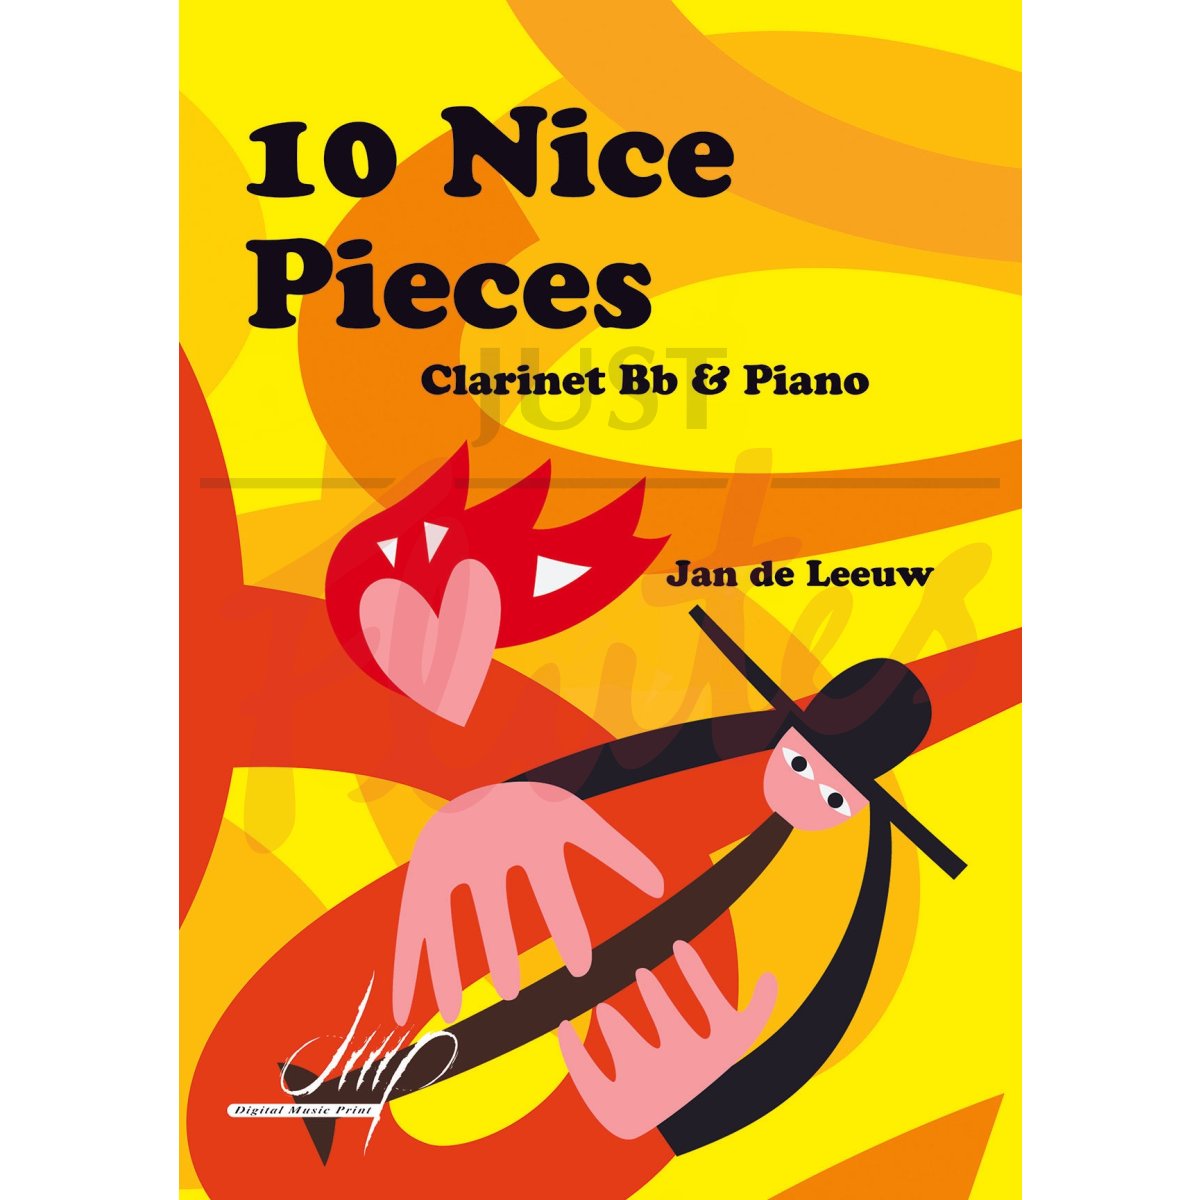 10 Nice Pieces for Clarinet and Piano